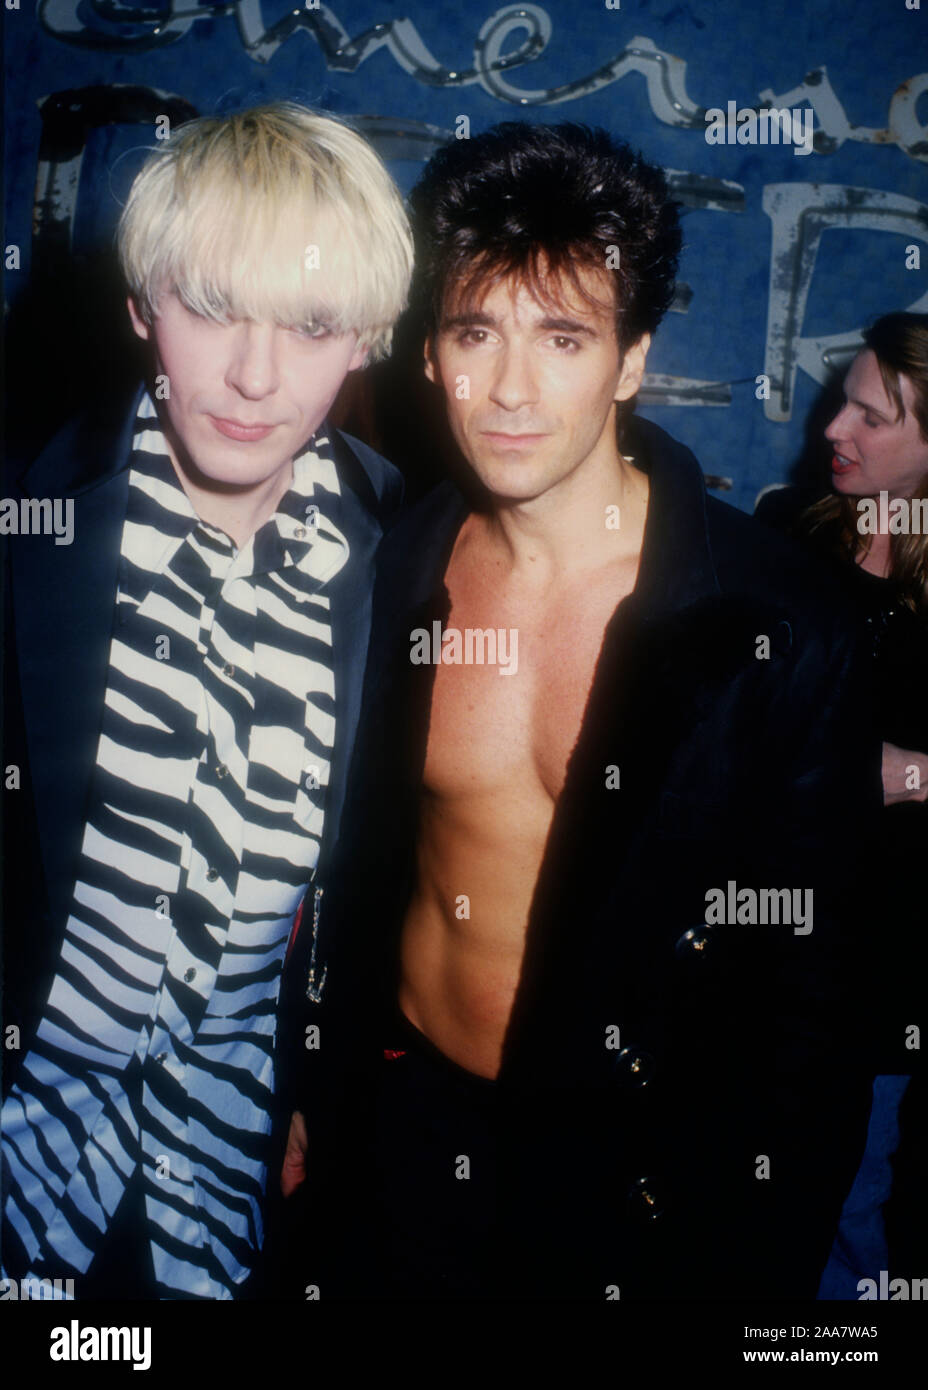 Las Vegas, Nevada, USA 10th March 1995 (L-R) Musicians Nick Rhodes and Warren Cuccurullo of Duran Duran attend the Grand Opening Celebration of the Hard Rock Hotel hosted by Peter Morgan on March 10, 1995 at The Hard Rock Hotel Las Vegas in Las Vegas, Nevada, USA. Photo by Barry King/Alamy Stock Photo Stock Photo